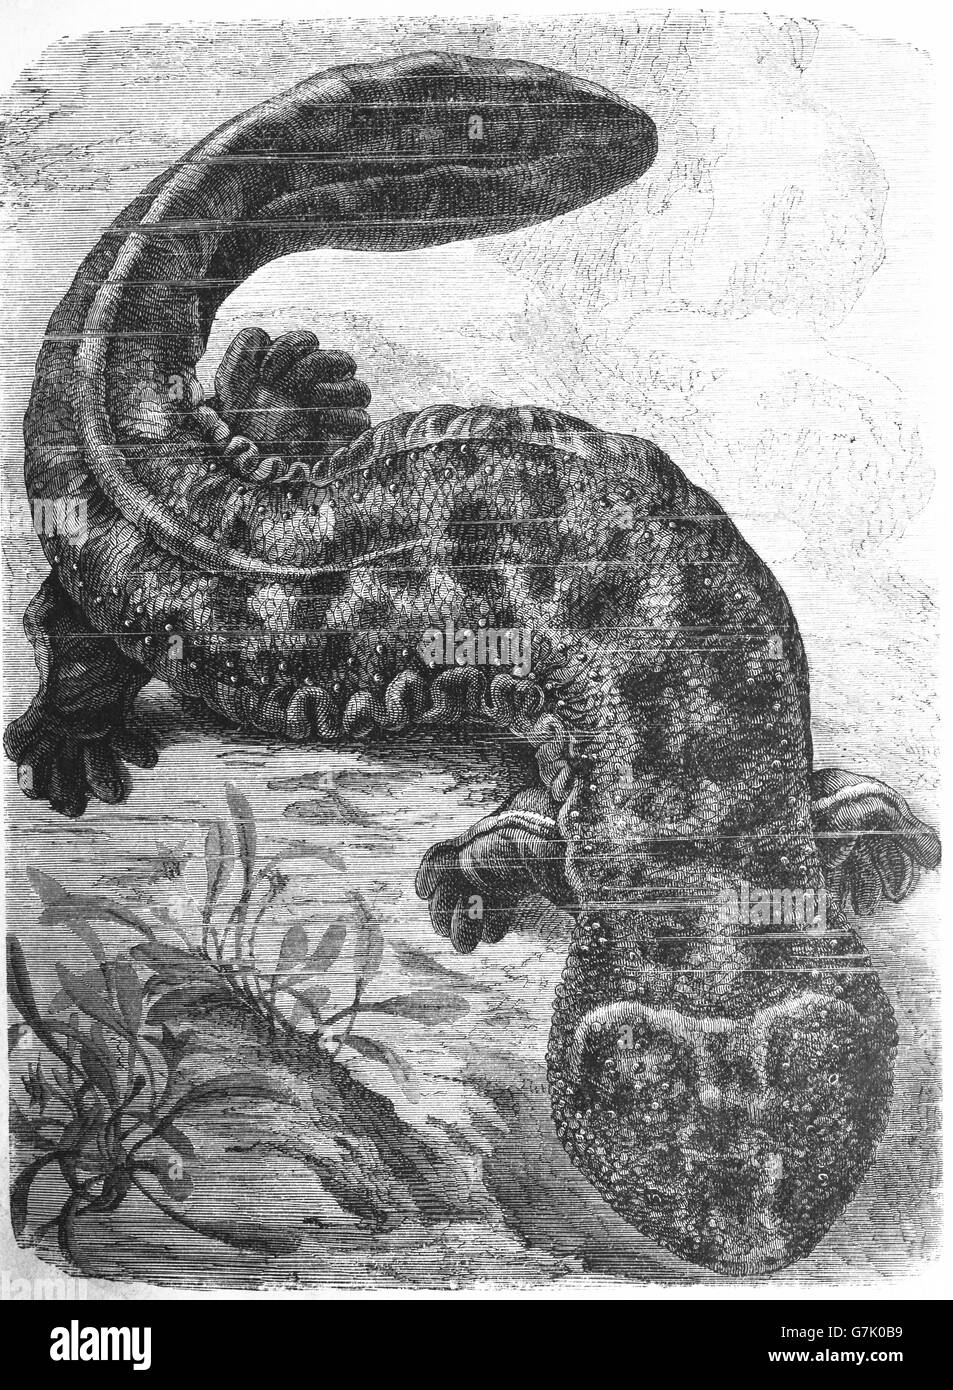 Japanese giant salamander, Andrias japonicus, illustration from book dated 1904 Stock Photo